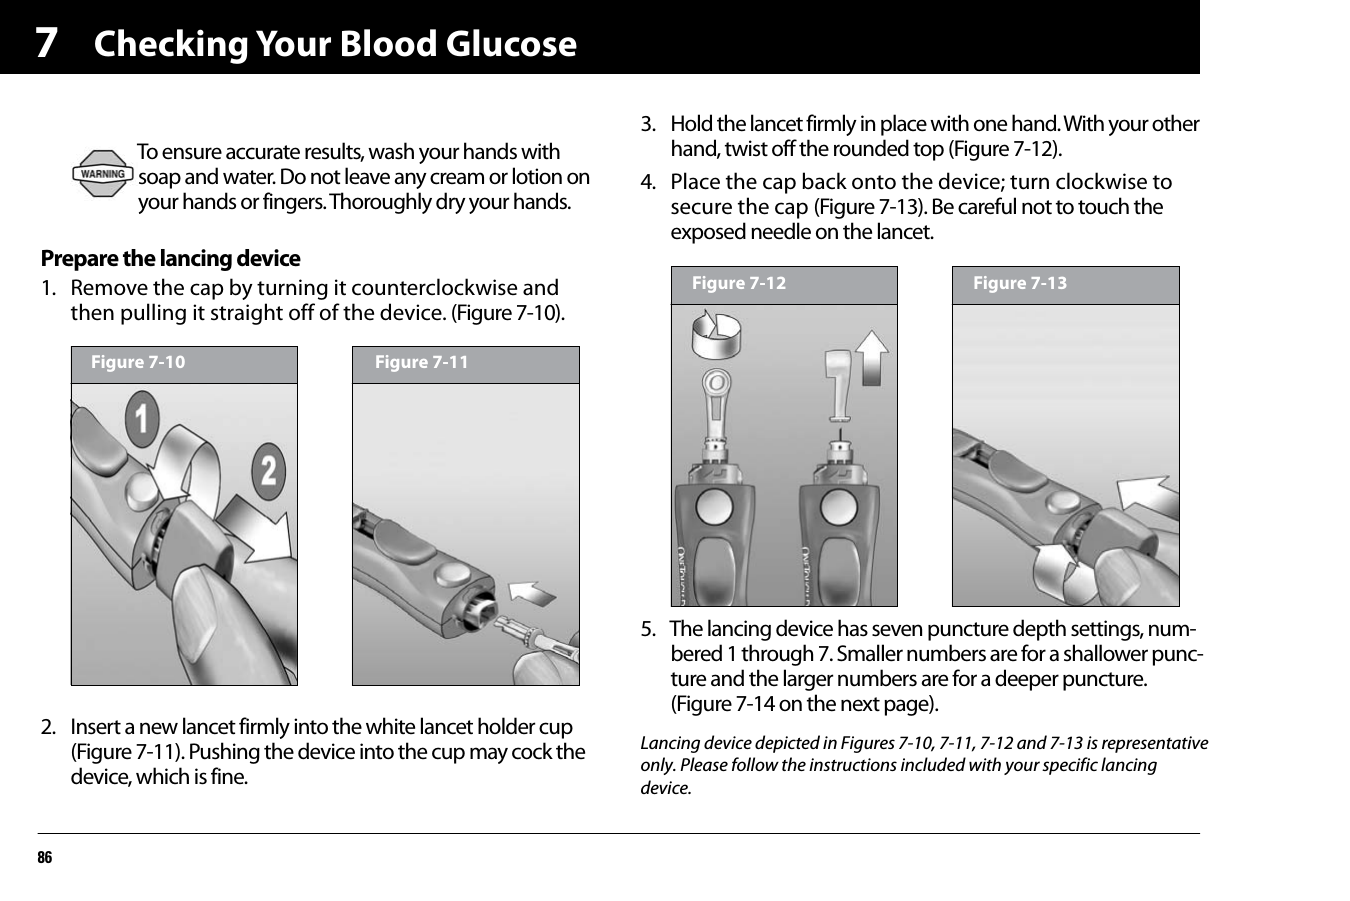 Checking Your Blood Glucose867Prepare the lancing device1. Remove the cap by turning it counterclockwise and then pulling it straight off of the device. (Figure 7-10).2. Insert a new lancet firmly into the white lancet holder cup (Figure 7-11). Pushing the device into the cup may cock the device, which is fine.3. Hold the lancet firmly in place with one hand. With your other hand, twist off the rounded top (Figure 7-12).4. Place the cap back onto the device; turn clockwise to secure the cap (Figure 7-13). Be careful not to touch the exposed needle on the lancet.5. The lancing device has seven puncture depth settings, num-bered 1 through 7. Smaller numbers are for a shallower punc-ture and the larger numbers are for a deeper puncture. (Figure 7-14 on the next page).To ensure accurate results, wash your hands with soap and water. Do not leave any cream or lotion on your hands or fingers. Thoroughly dry your hands.Figure 7-10 Figure 7-11Figure 7-12 Figure 7-13Lancing device depicted in Figures 7-10, 7-11, 7-12 and 7-13 is representativeonly. Please follow the instructions included with your specific lancingdevice.